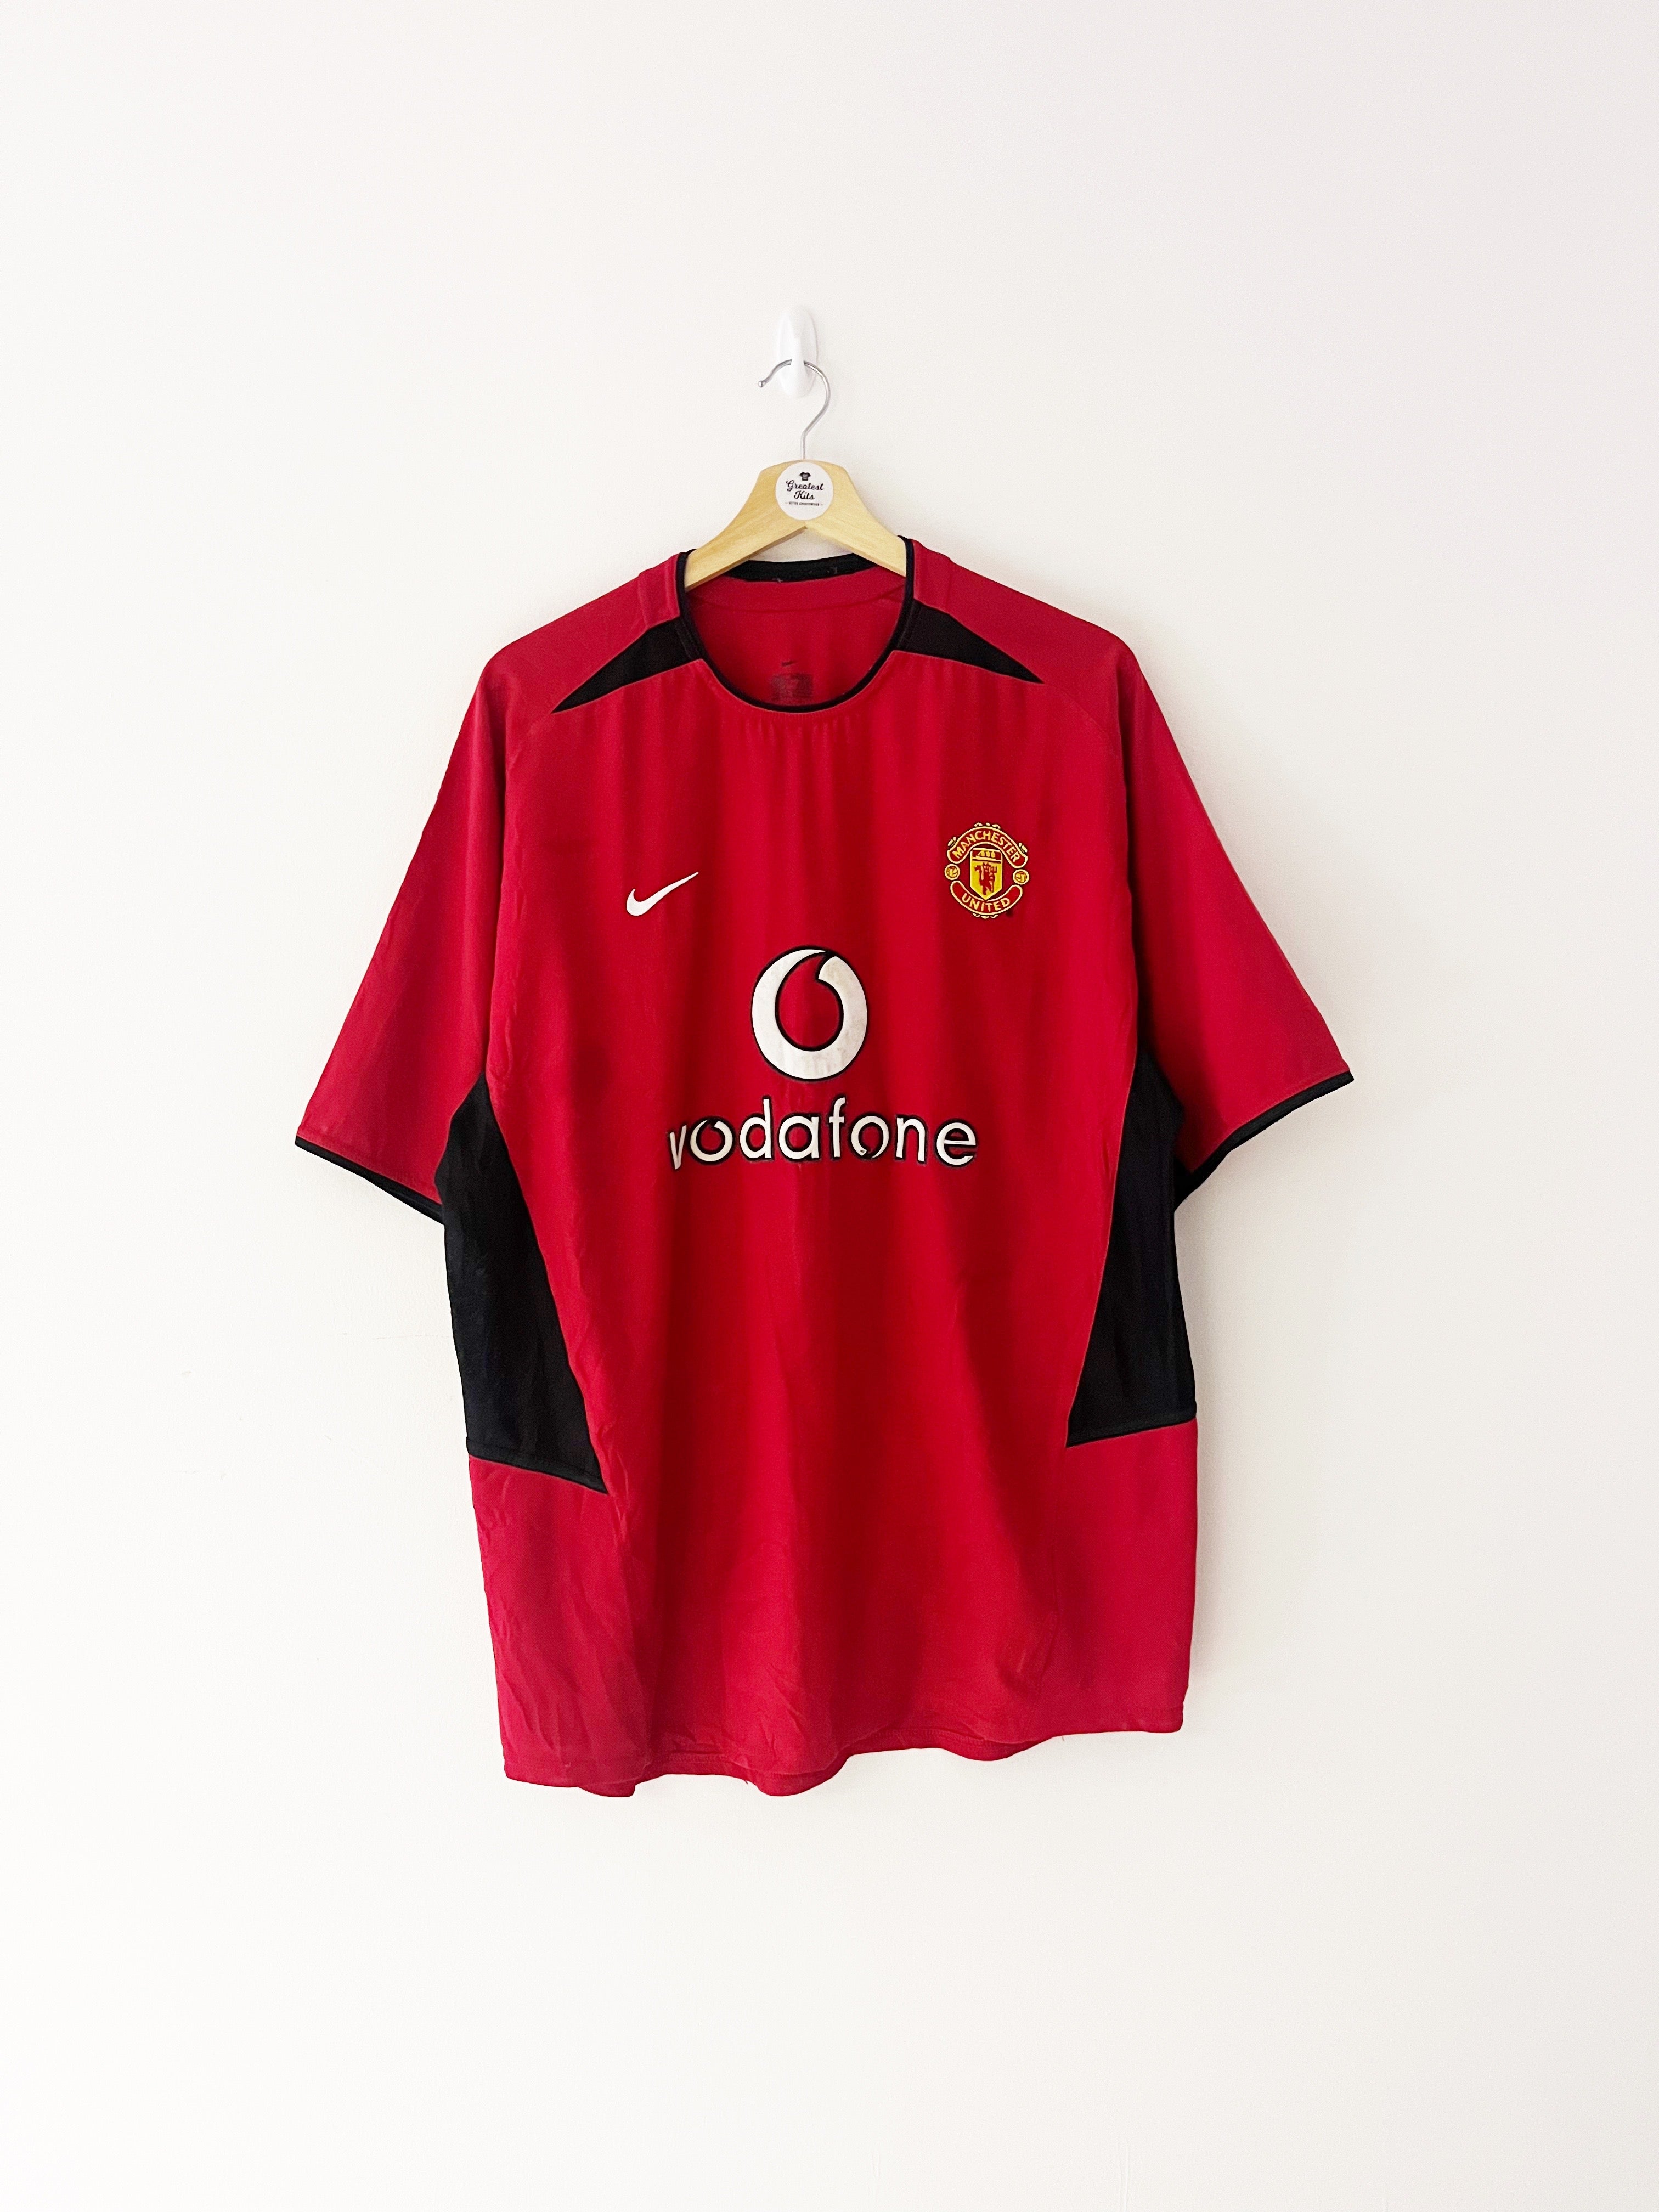 2002/04 Manchester United Home Shirt (L) 7.5/10